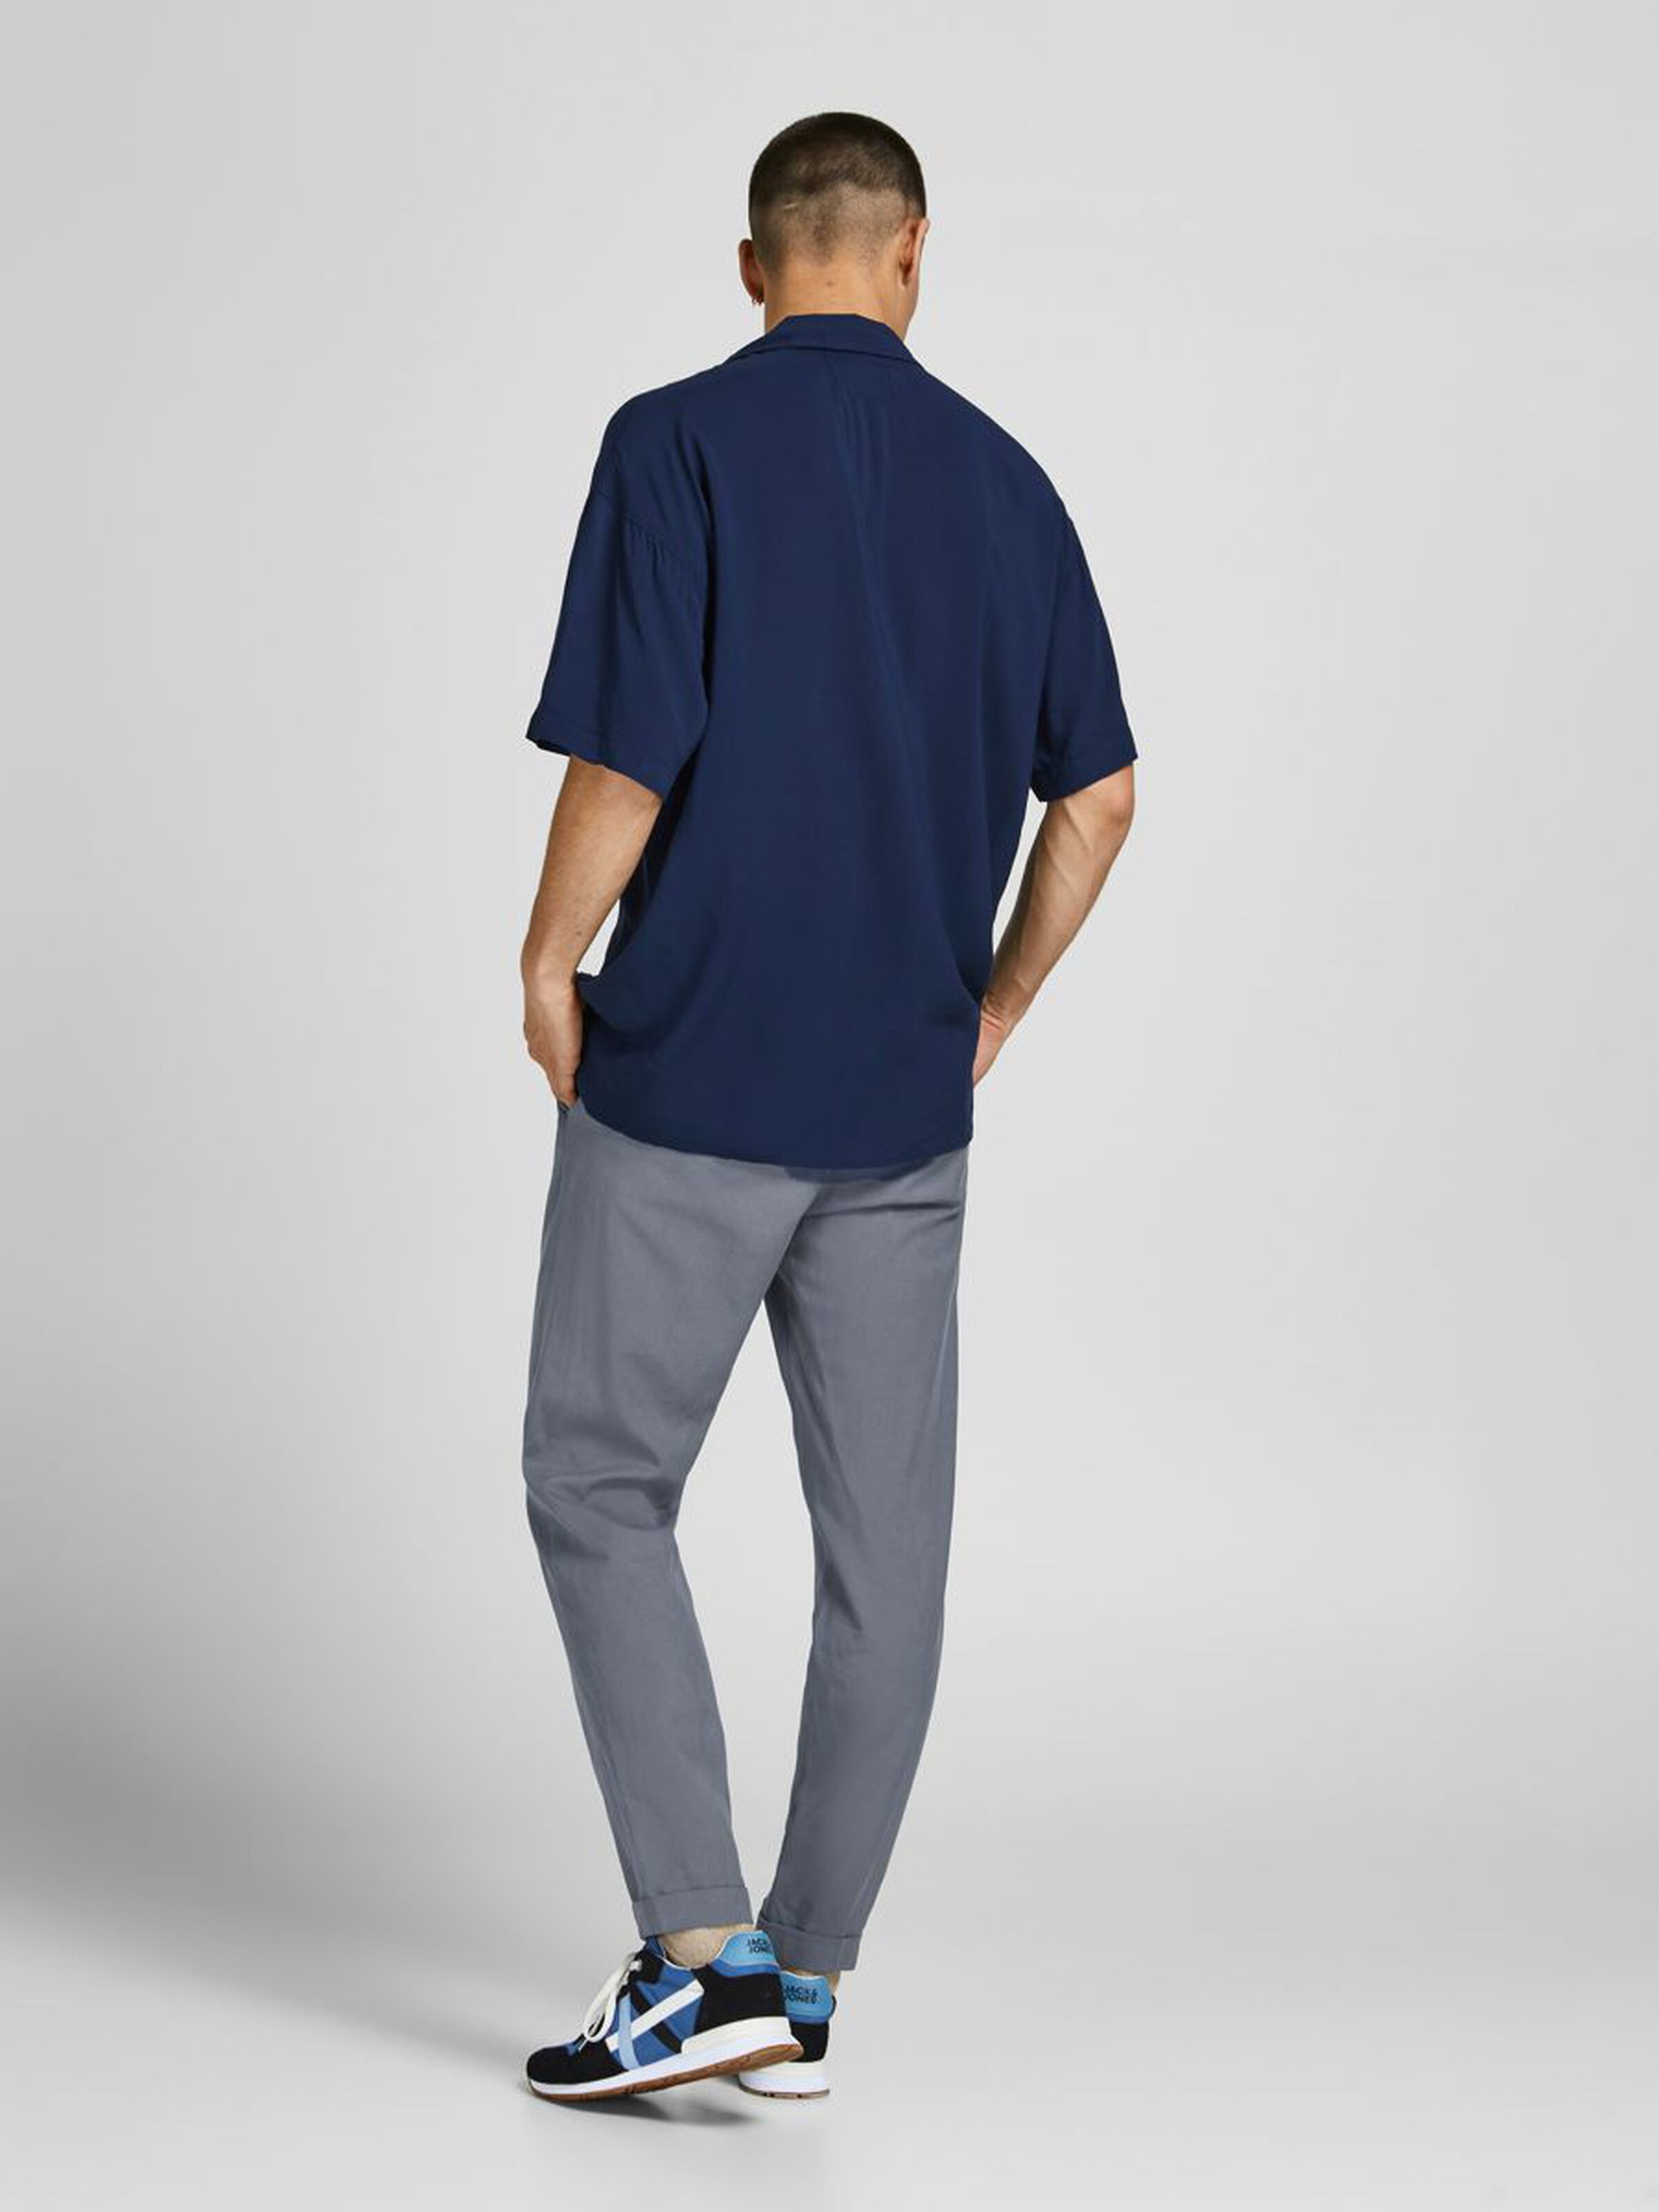 regular fit chinos trousers - blue/grisaille